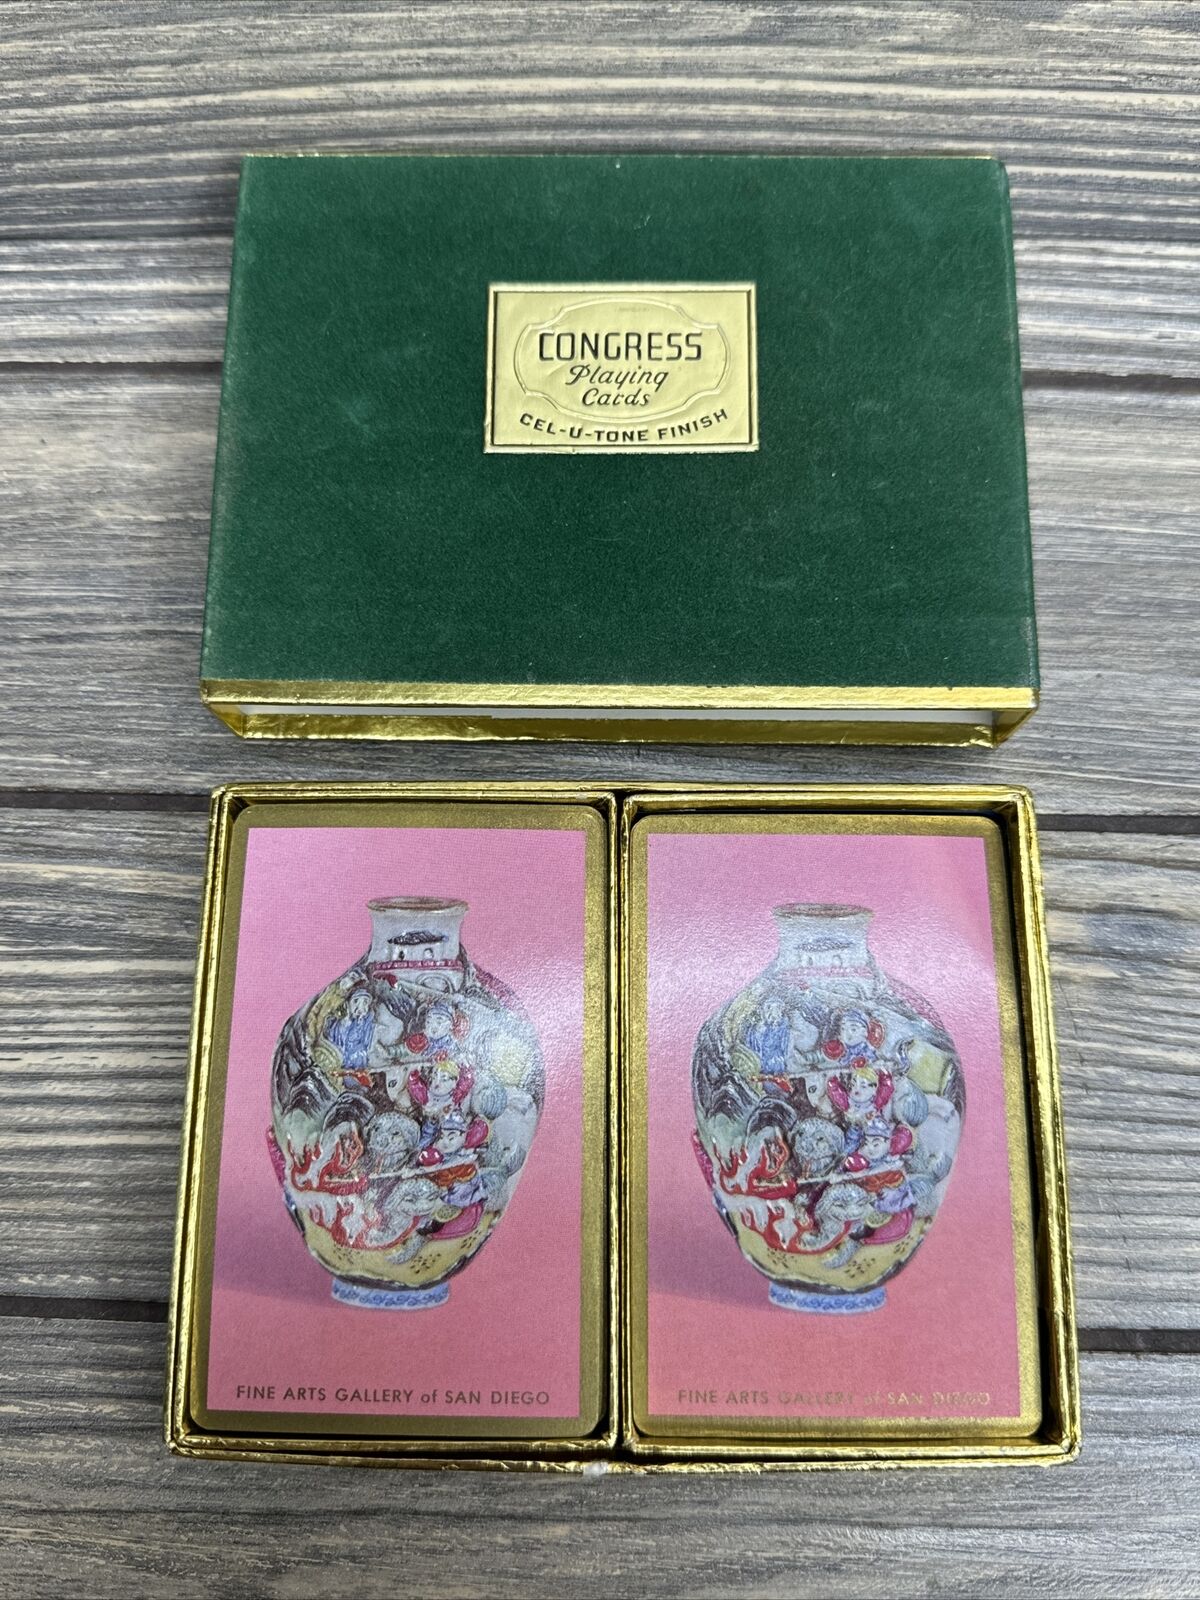 Vtg Congress Pinochle Playing Cards Fine Arts Gallery San Francisco Floral Vase